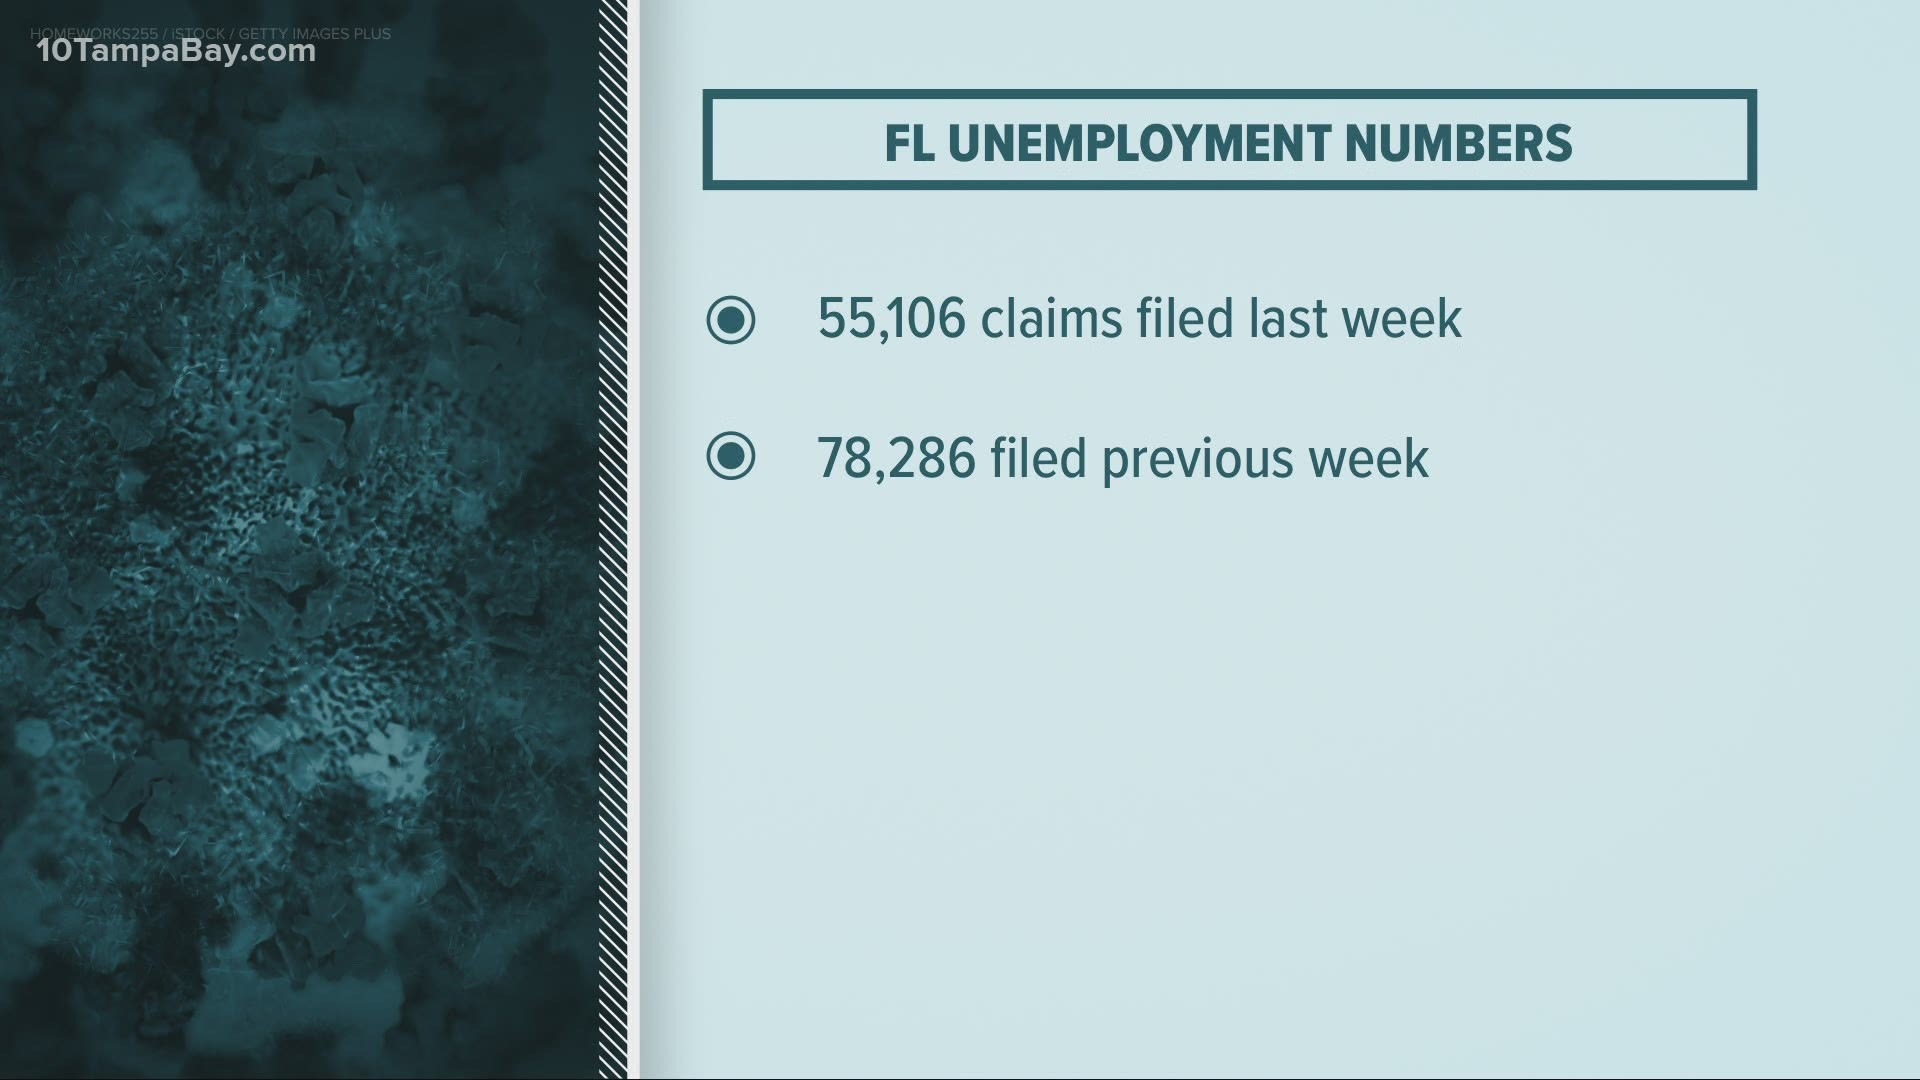 About 963,000 workers filed new unemployment claims last week. While claims remain historically high, it's the first time since March it's dipped below 1 million.